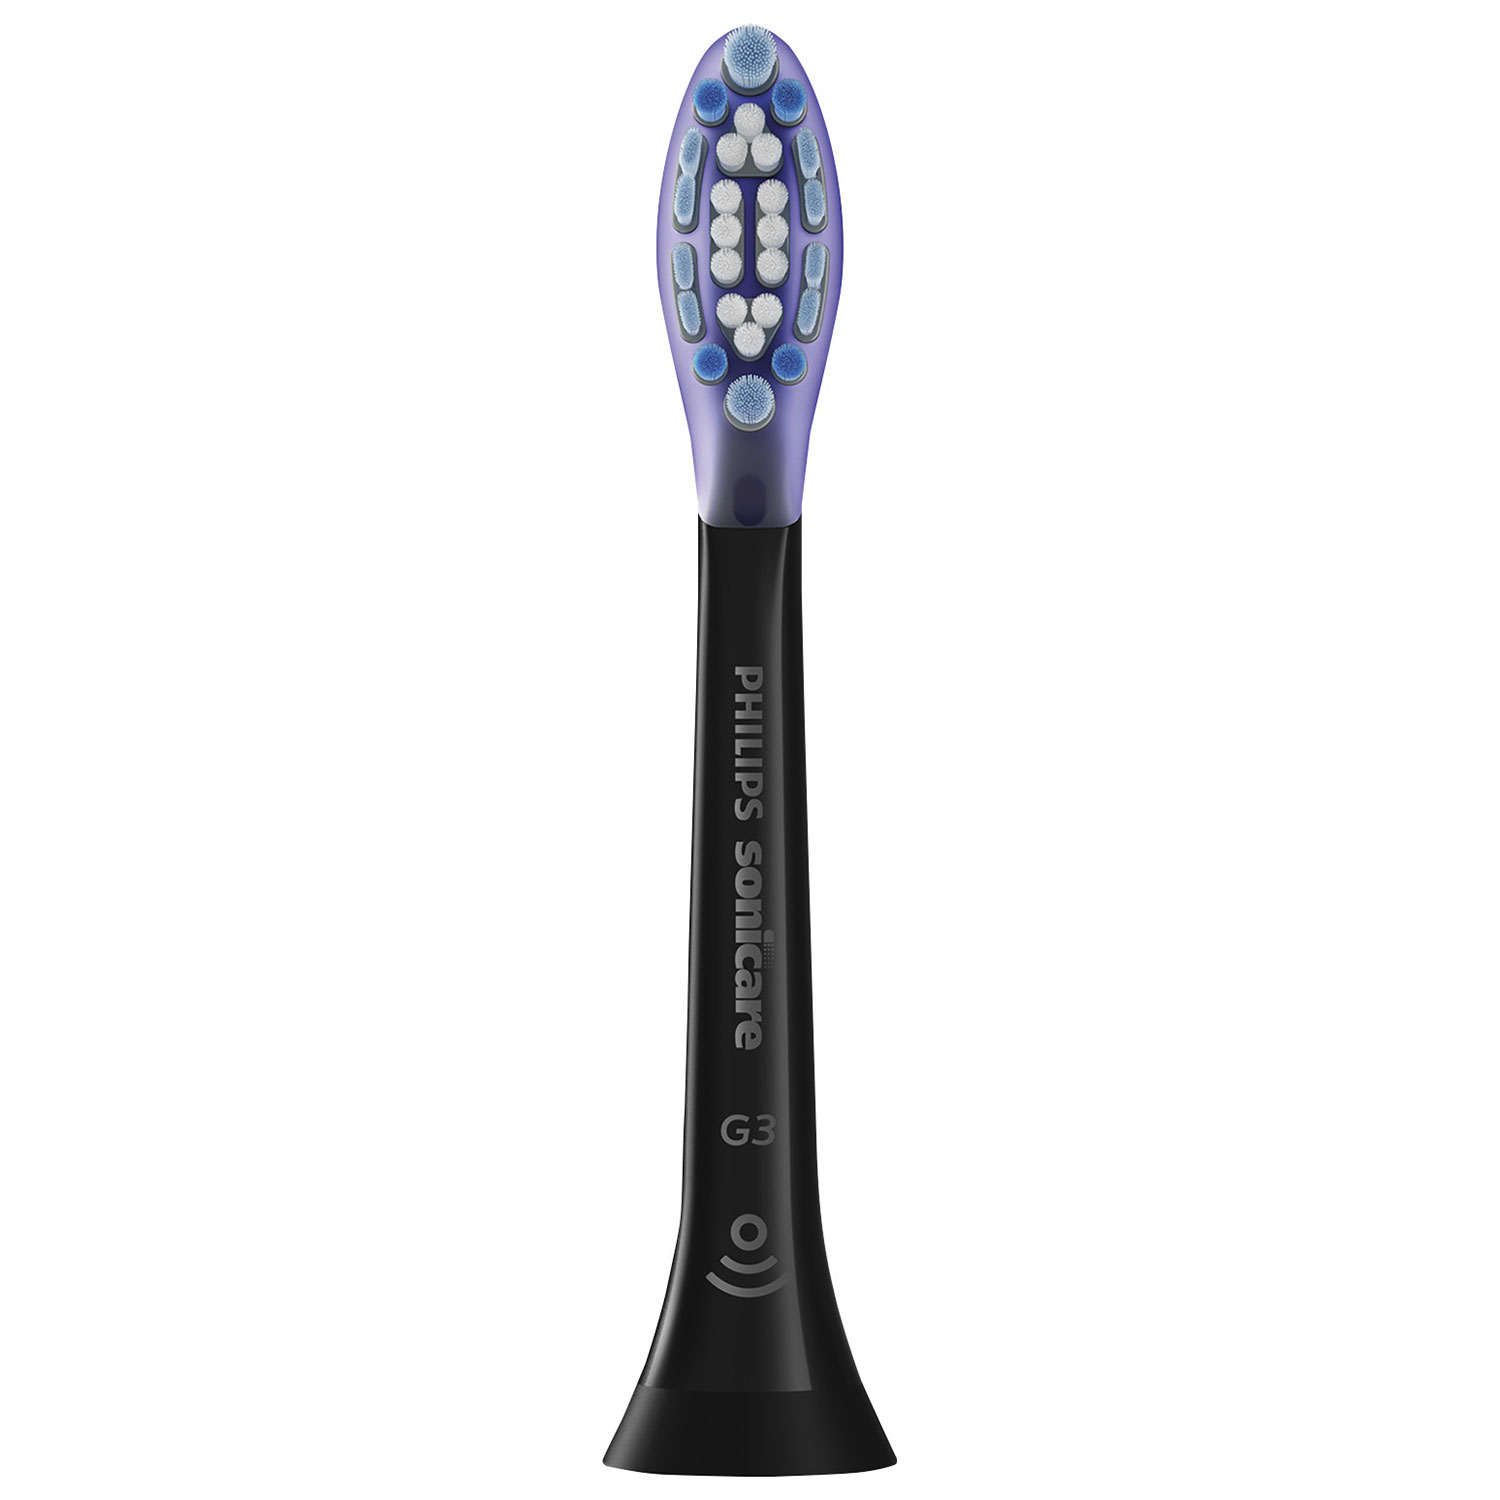 Philips Sonicare Premium Gum Care Replacement Toothbrush Heads - 2 Pack - Black